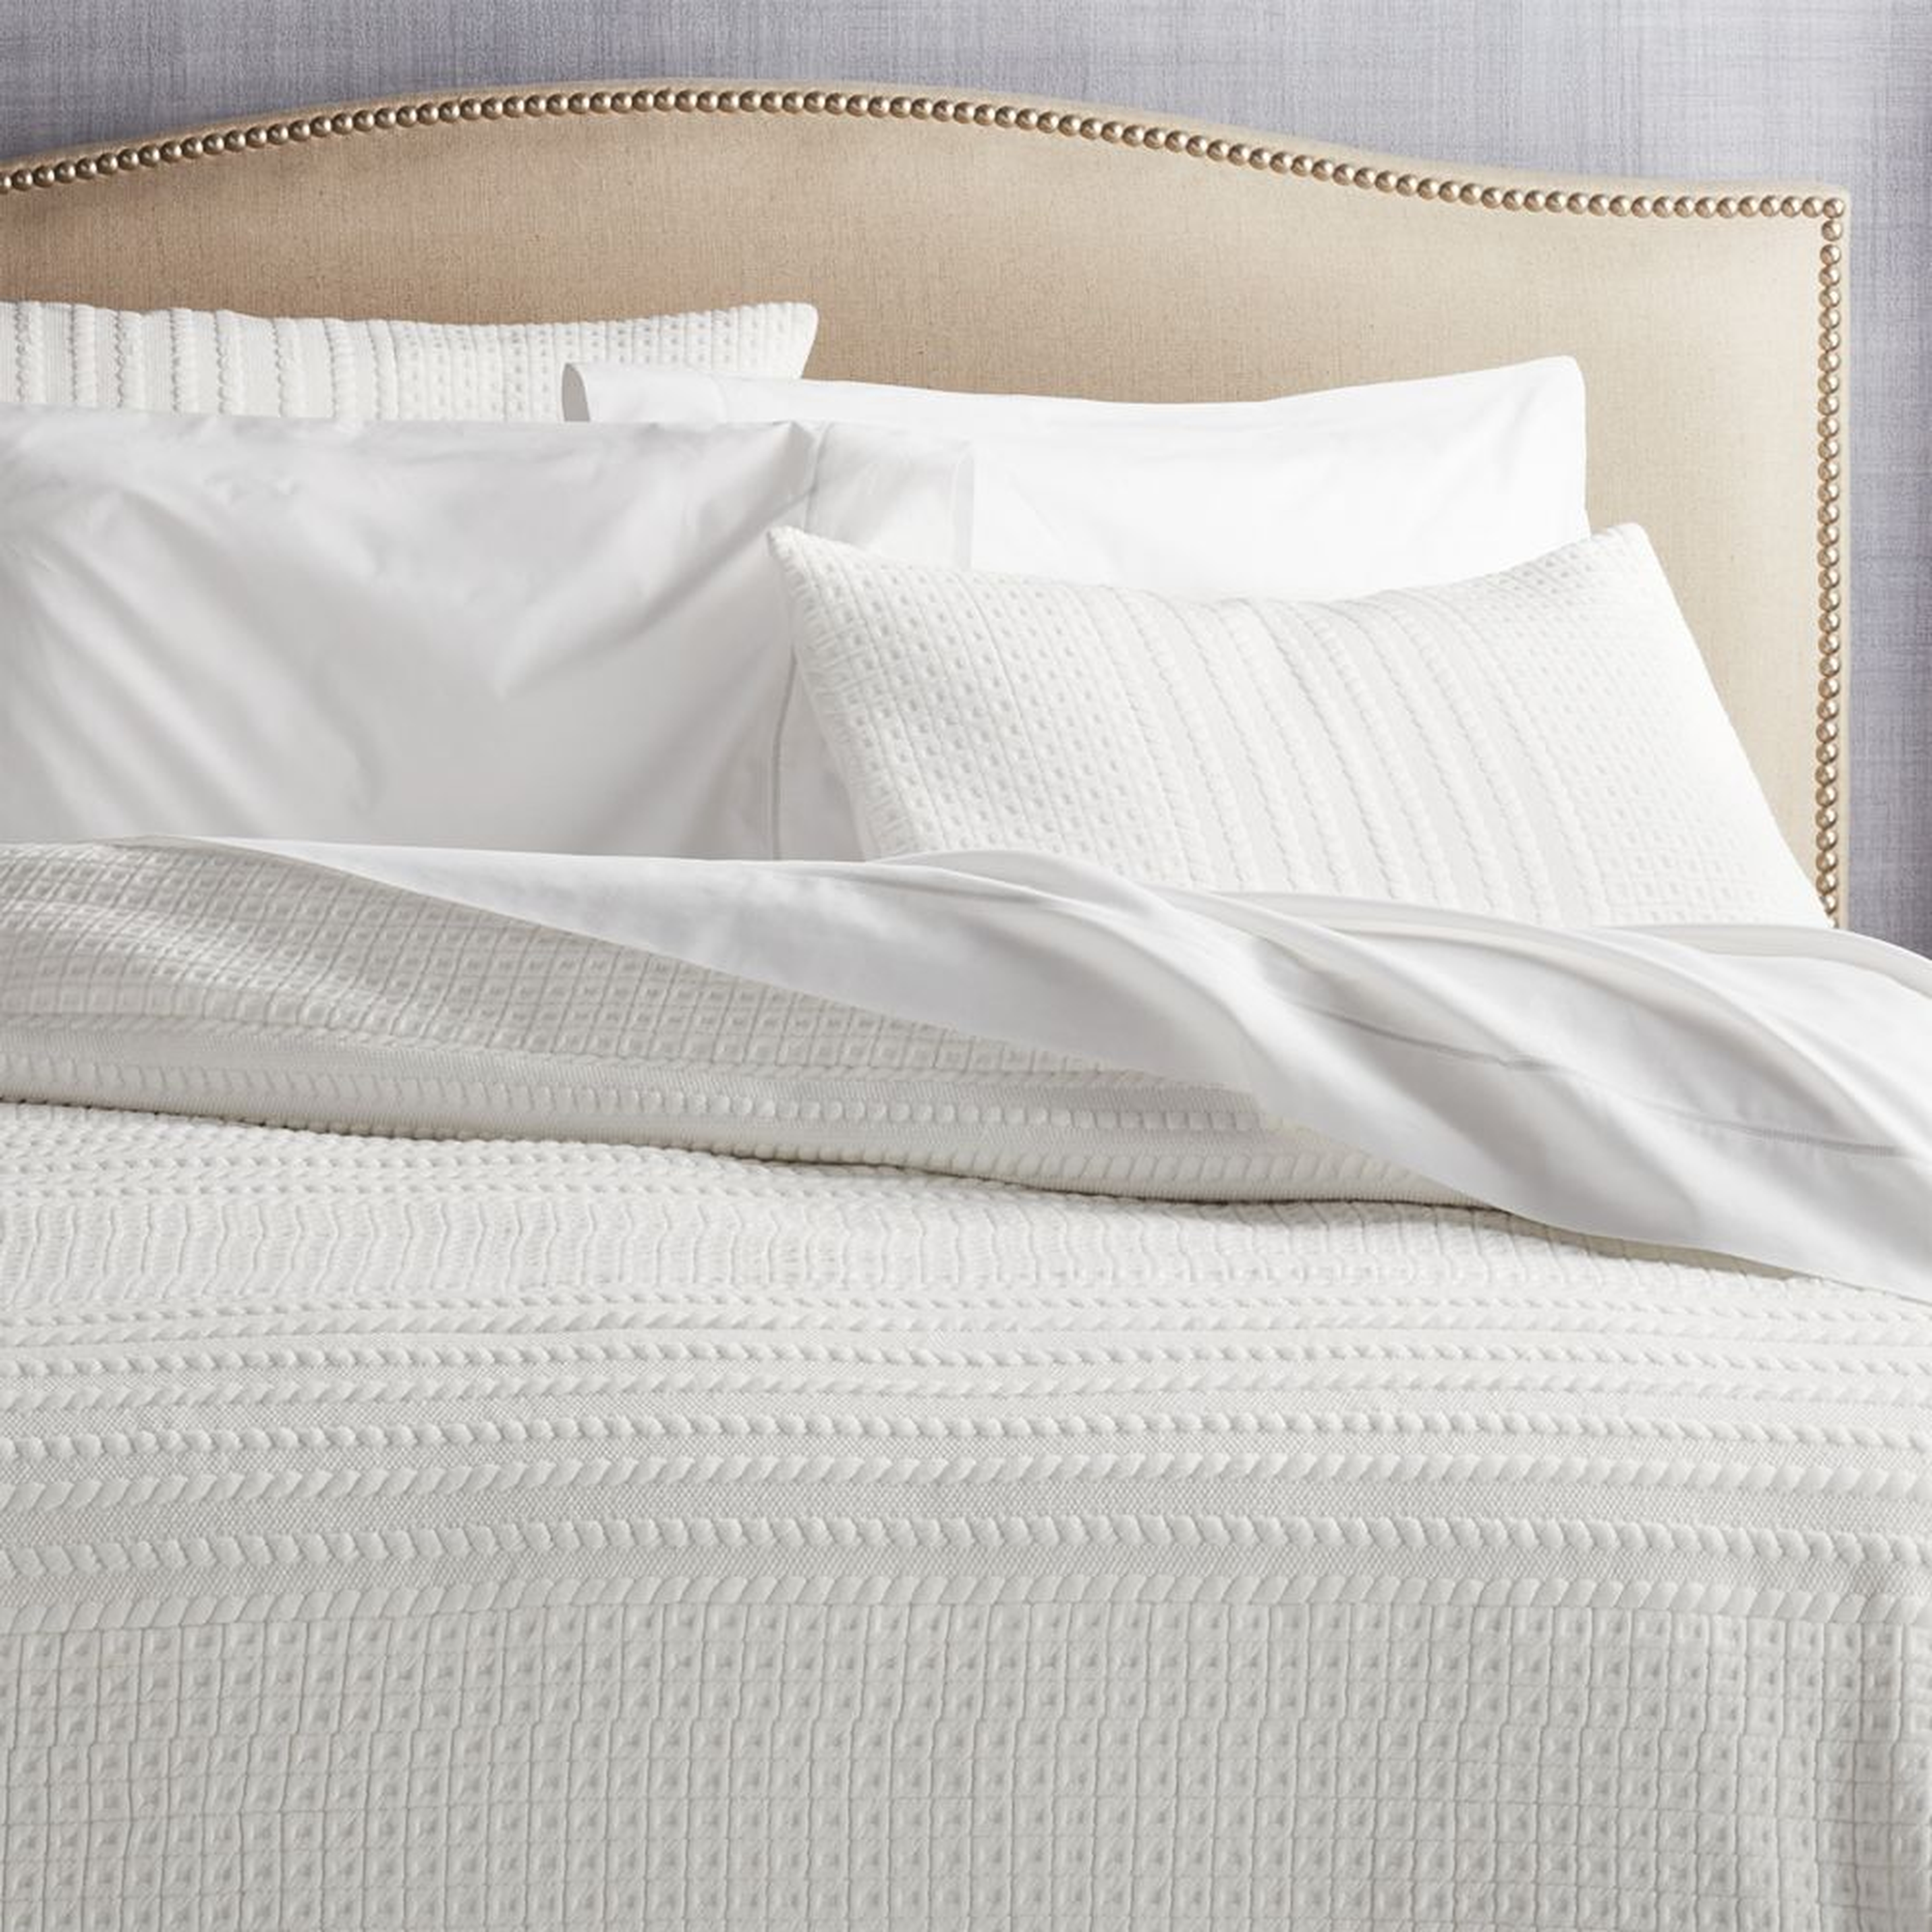 Doret White Jersey Quilt King - Crate and Barrel